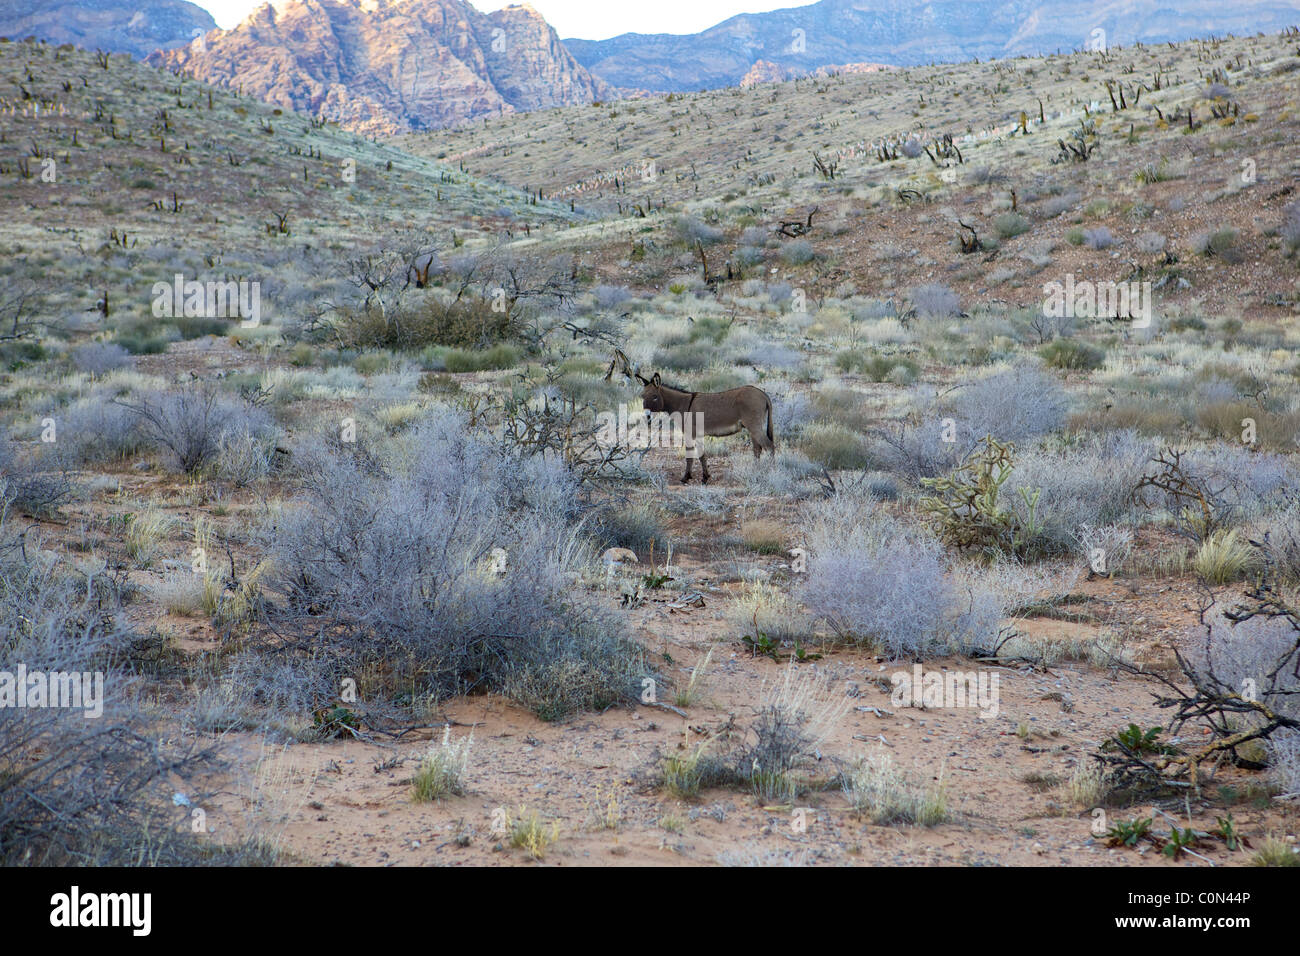 Wilde Esel am Red Rock Canyon Stockfoto